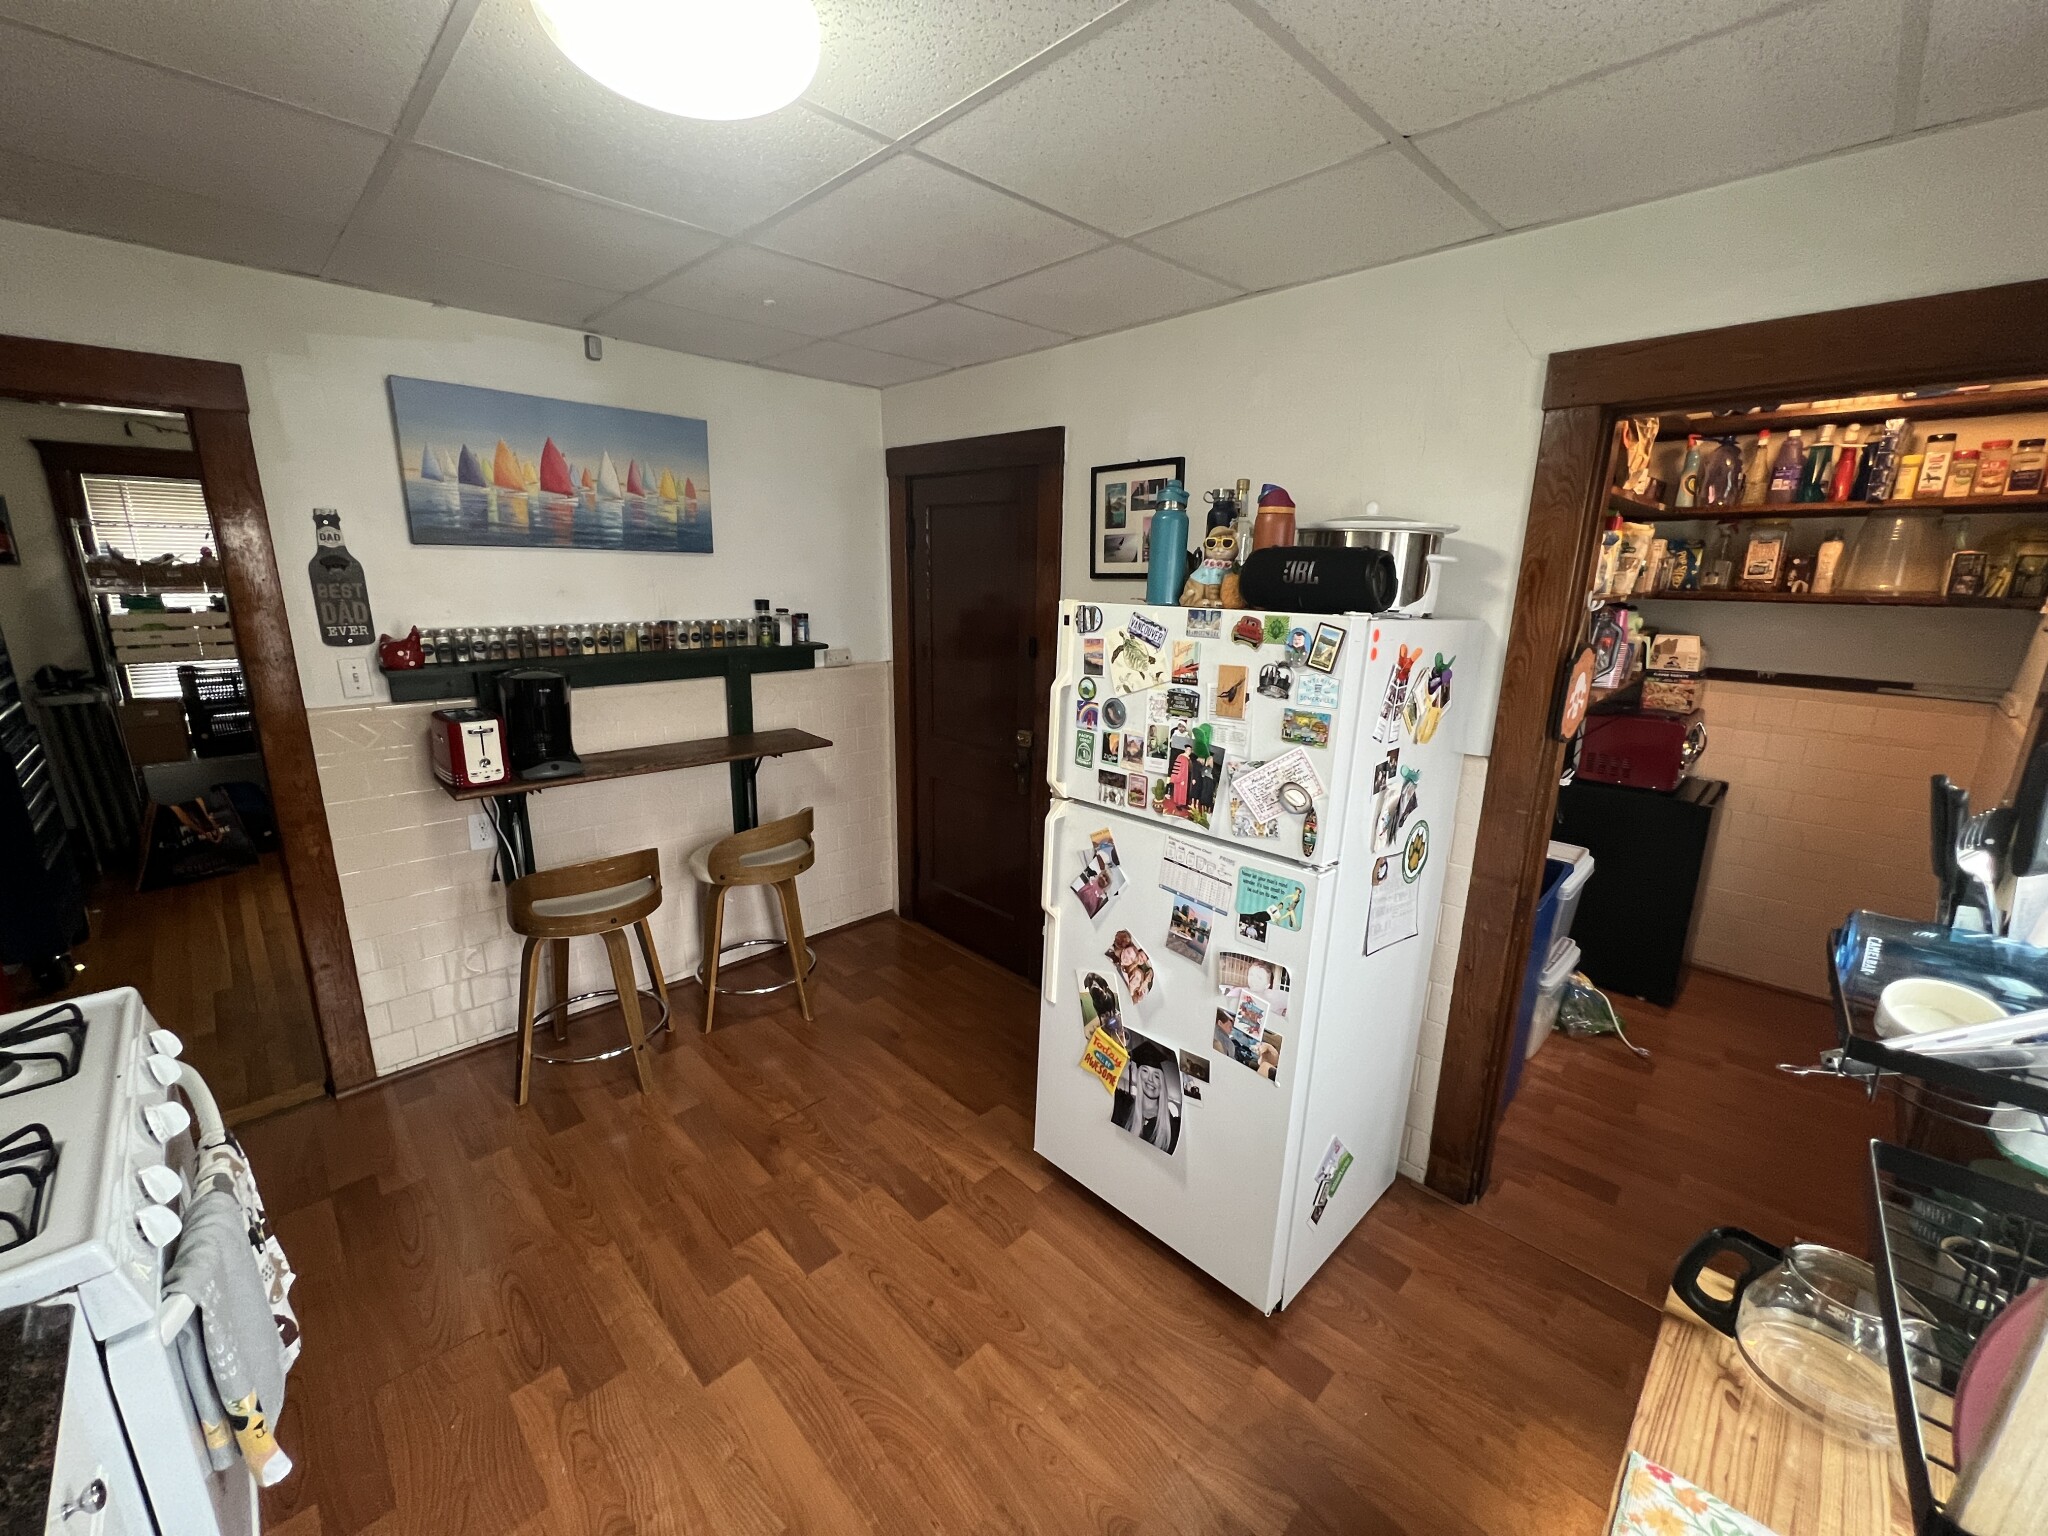 Photos of apartment on Silvey Pl.,Somerville MA 02143